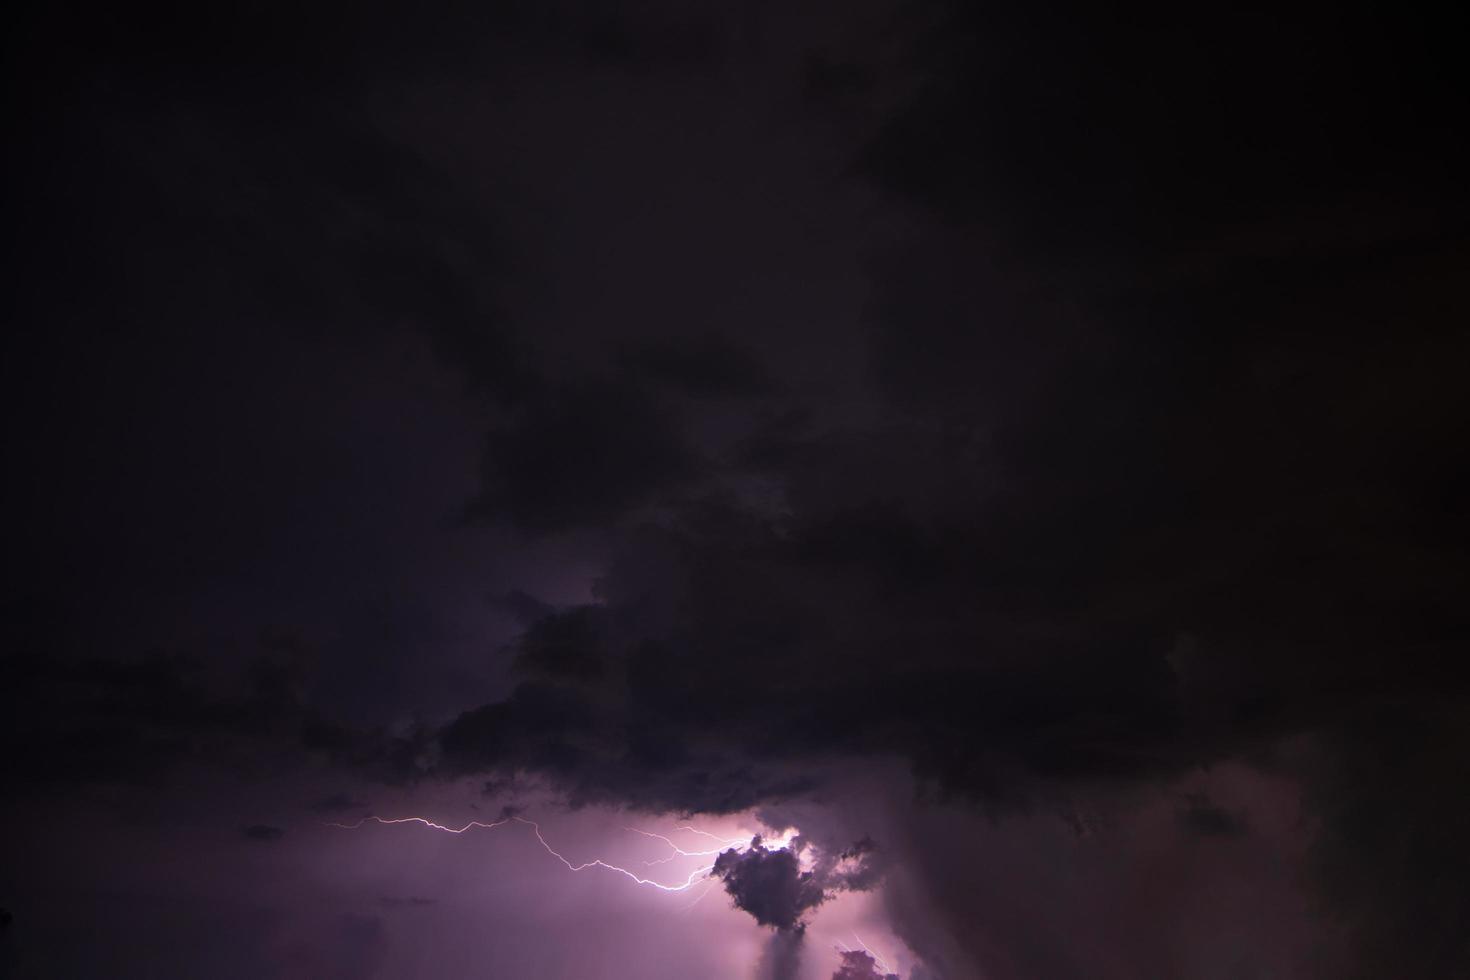 Lightning and dramatic stormy sky photo